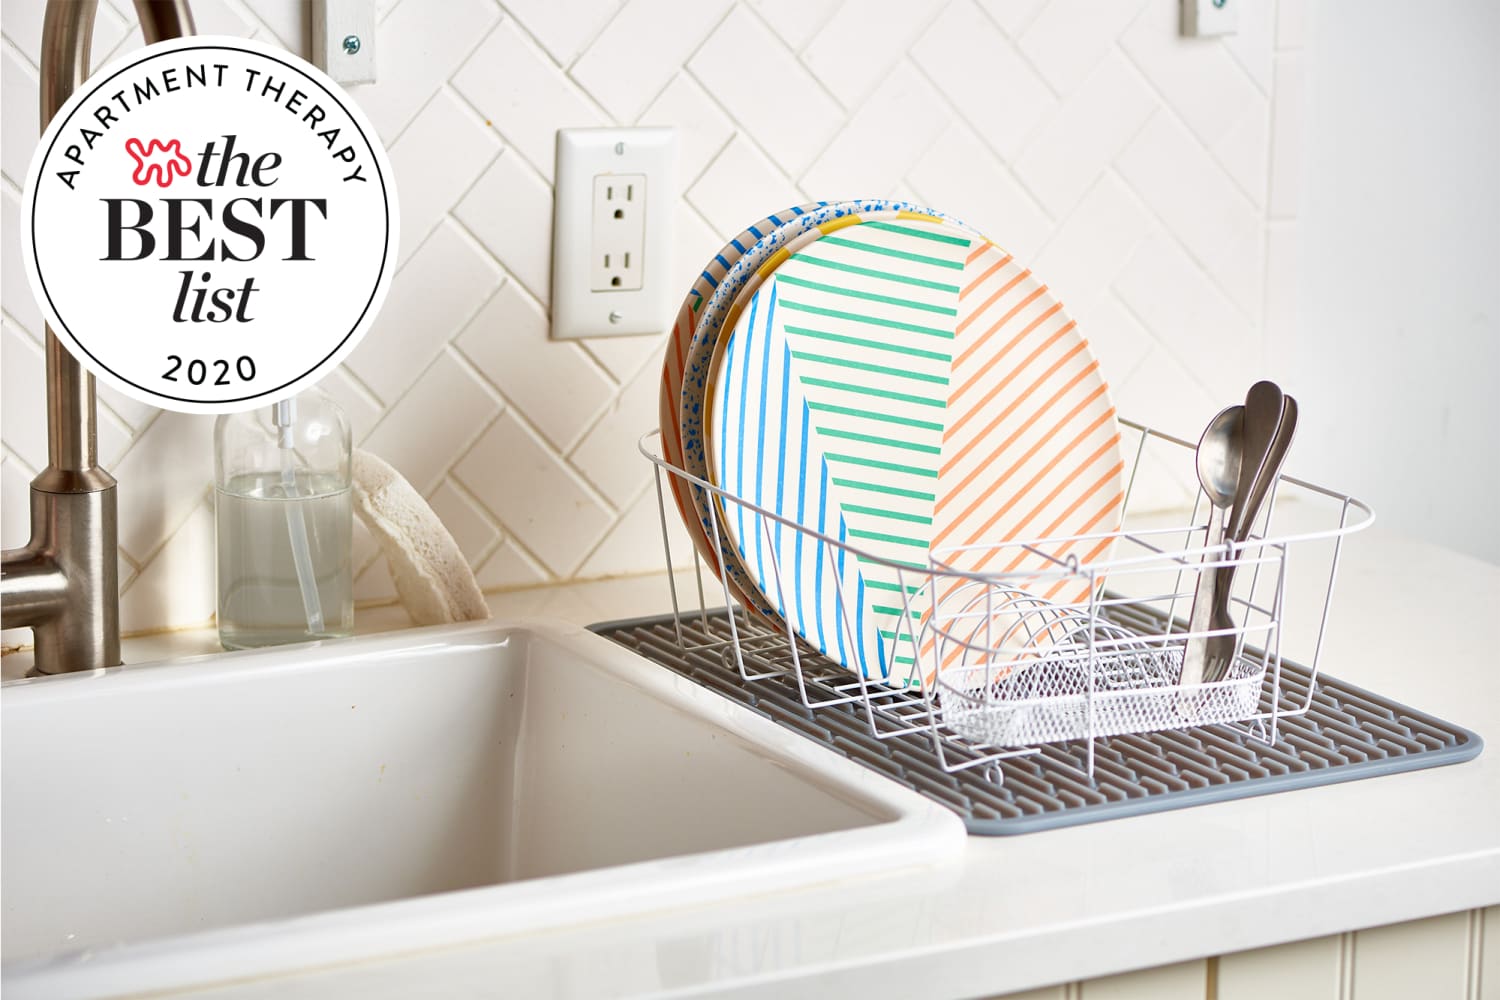 Top 5 Best KitchenAid Dish Rack to Buy in 2020 